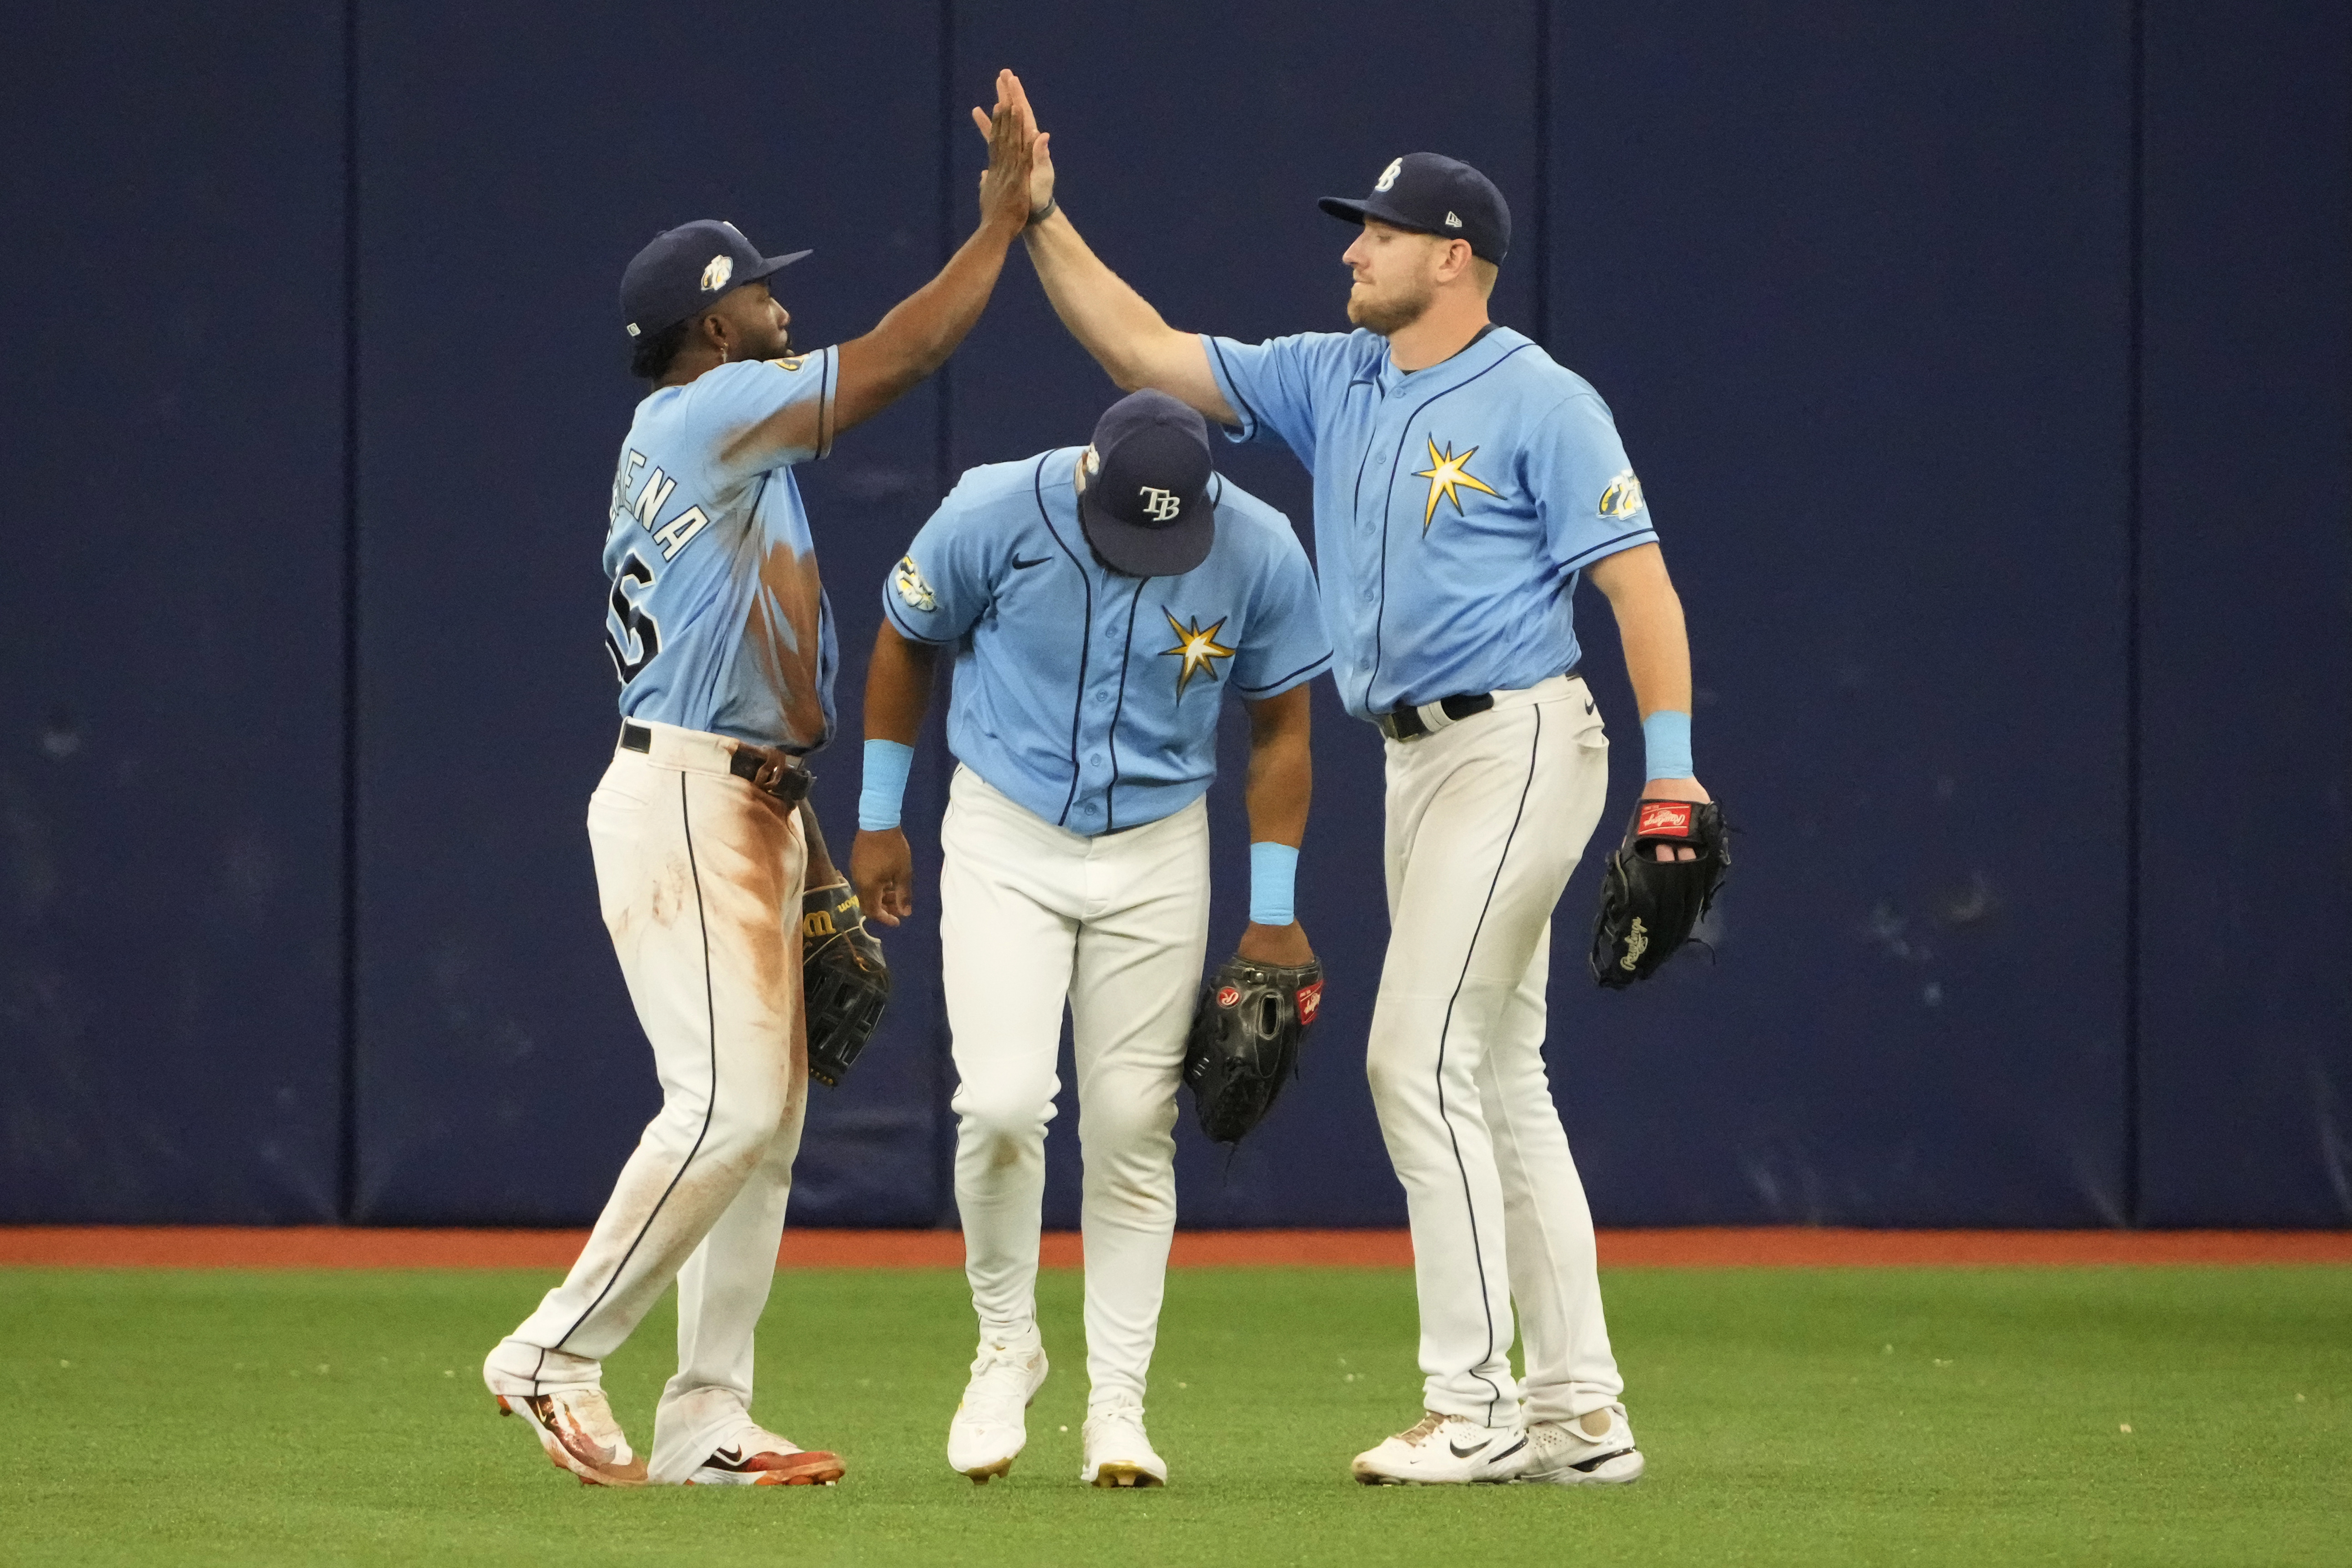 Rays beat White Sox, improve to 13-0 at home